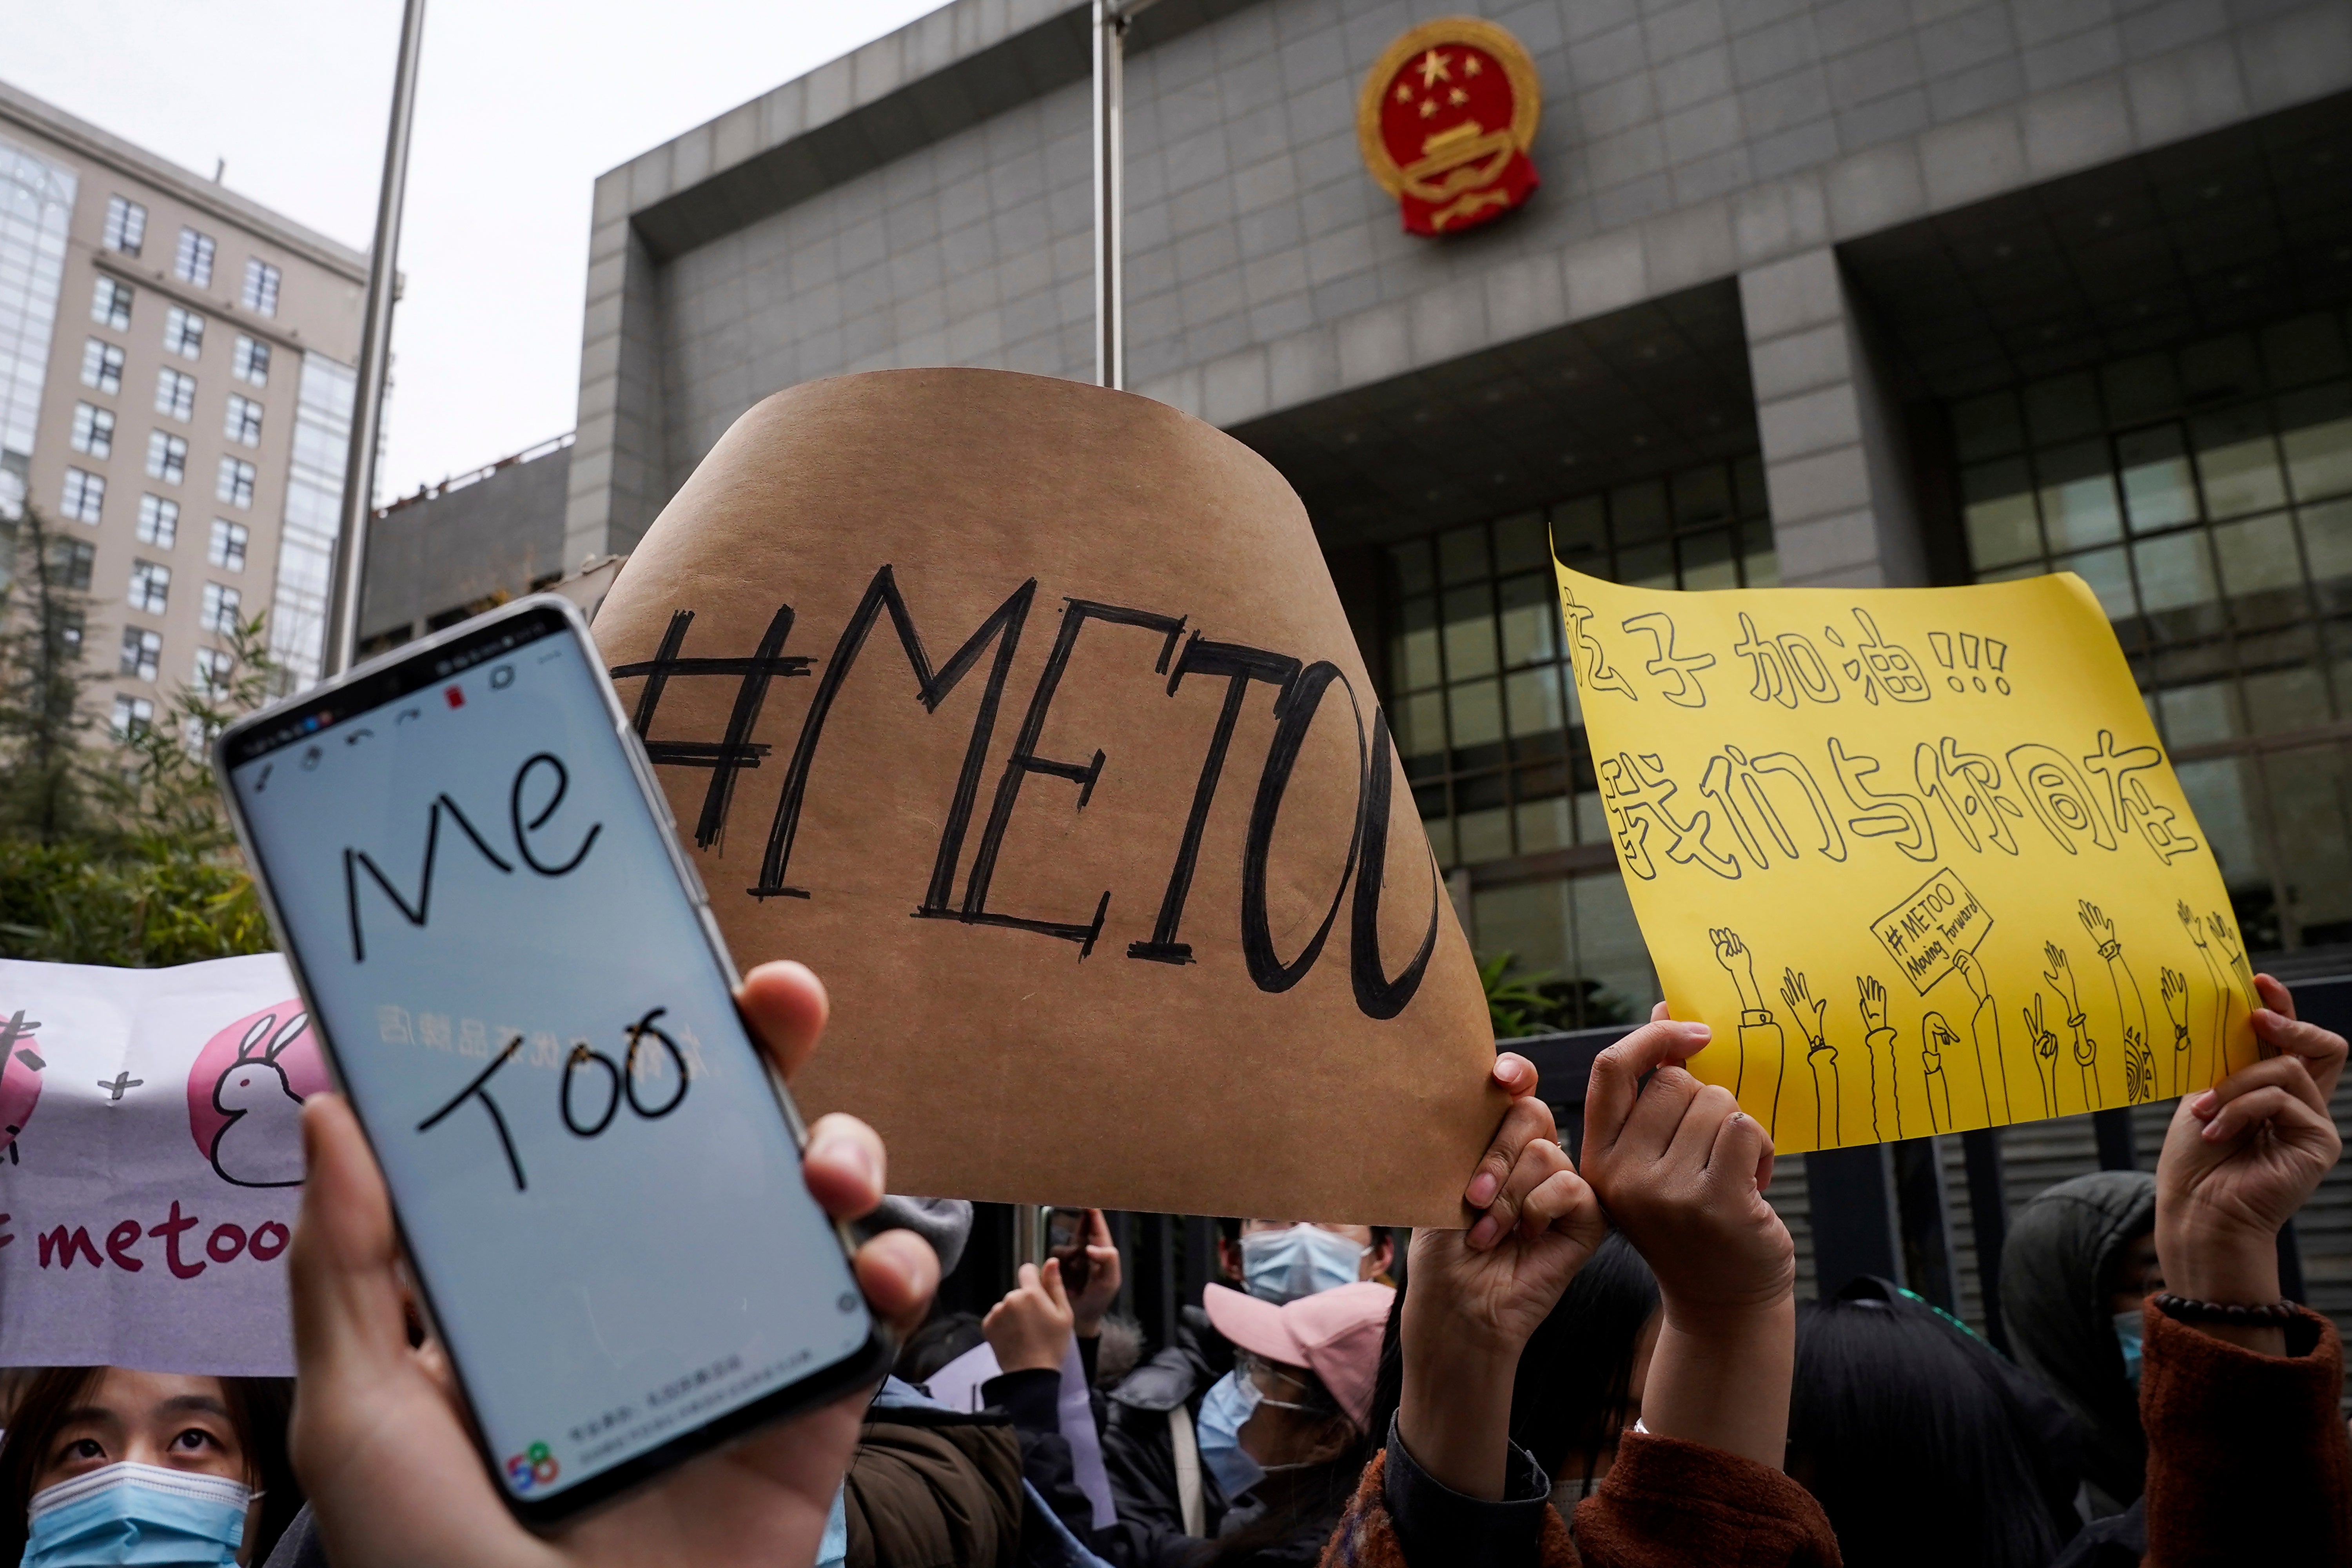 China is mulling strengthening sexual harassment laws to protect women